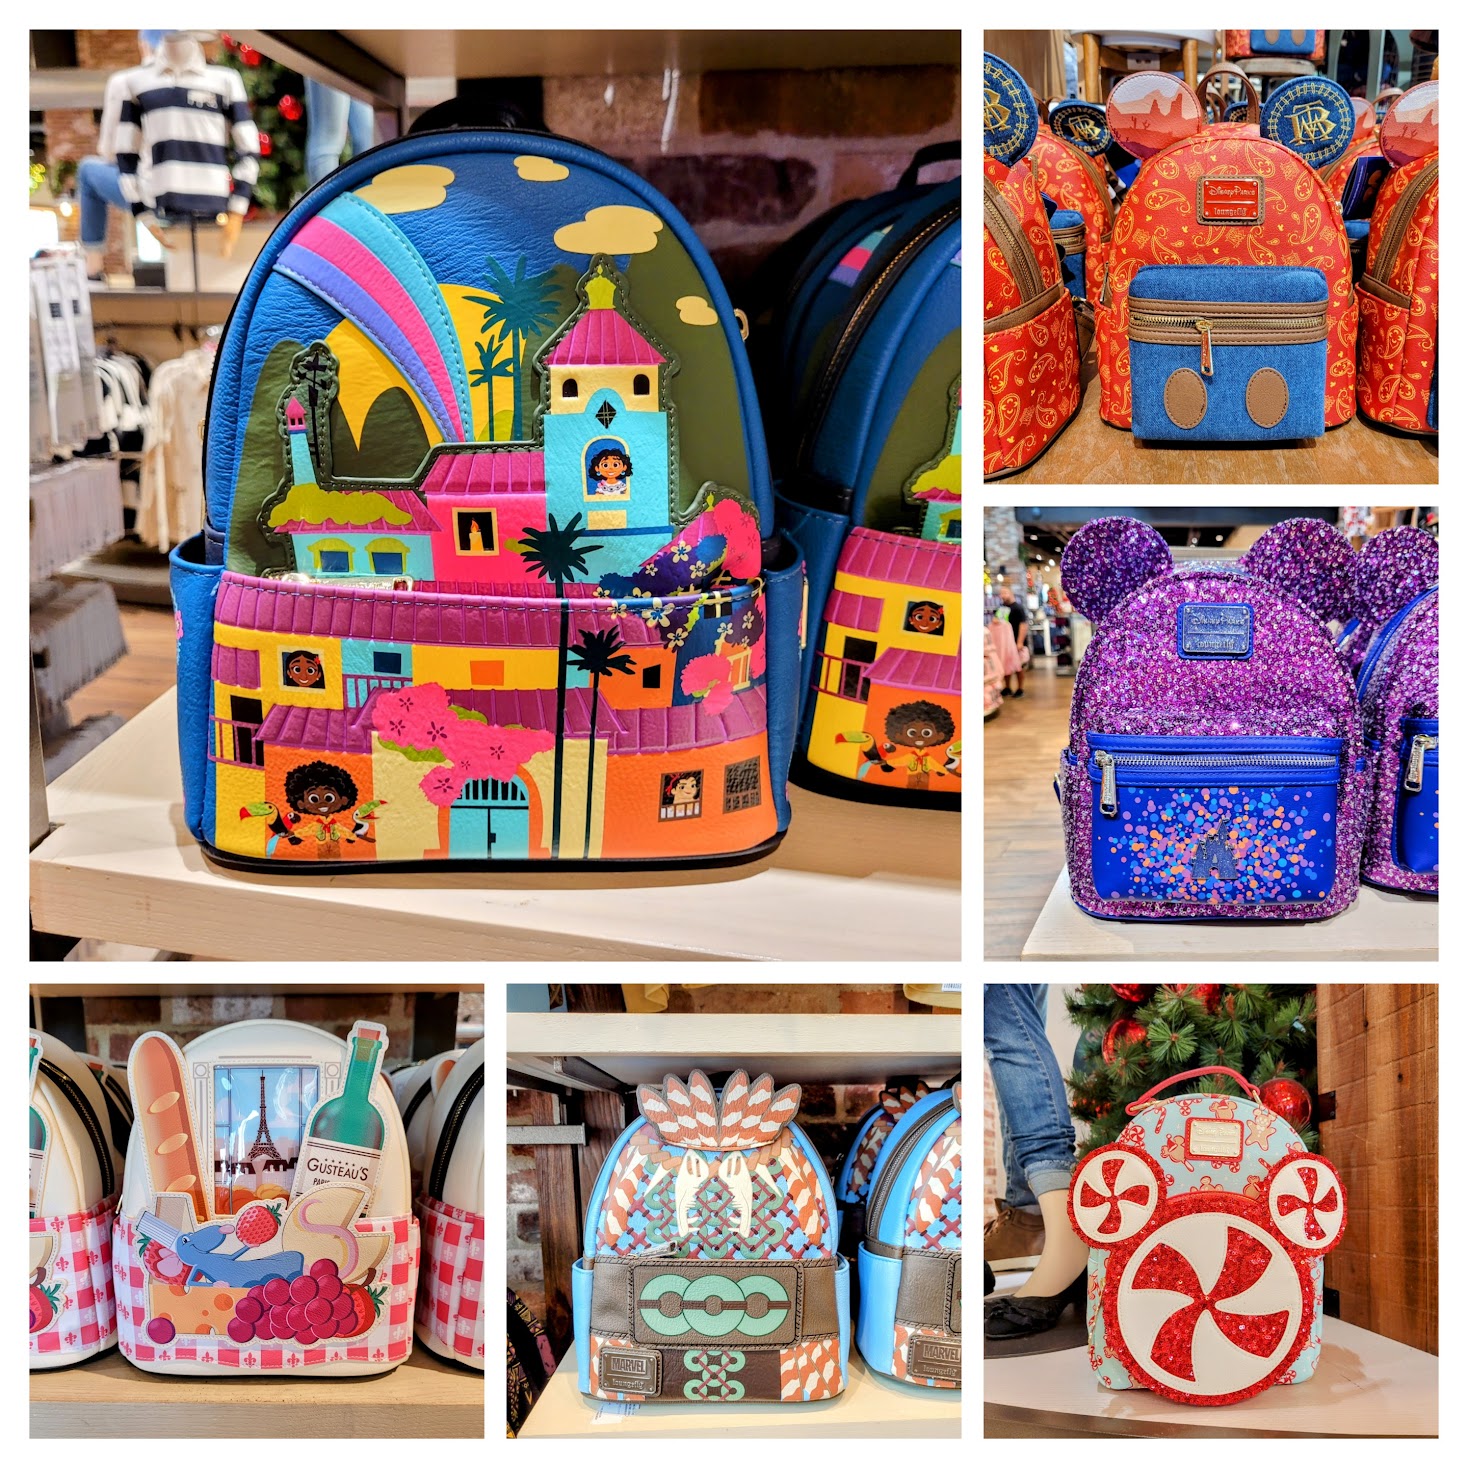 What is the most expensive loungefly backpack - Loungefly Disney Parks Exclusive Backpack park-themed designs and features